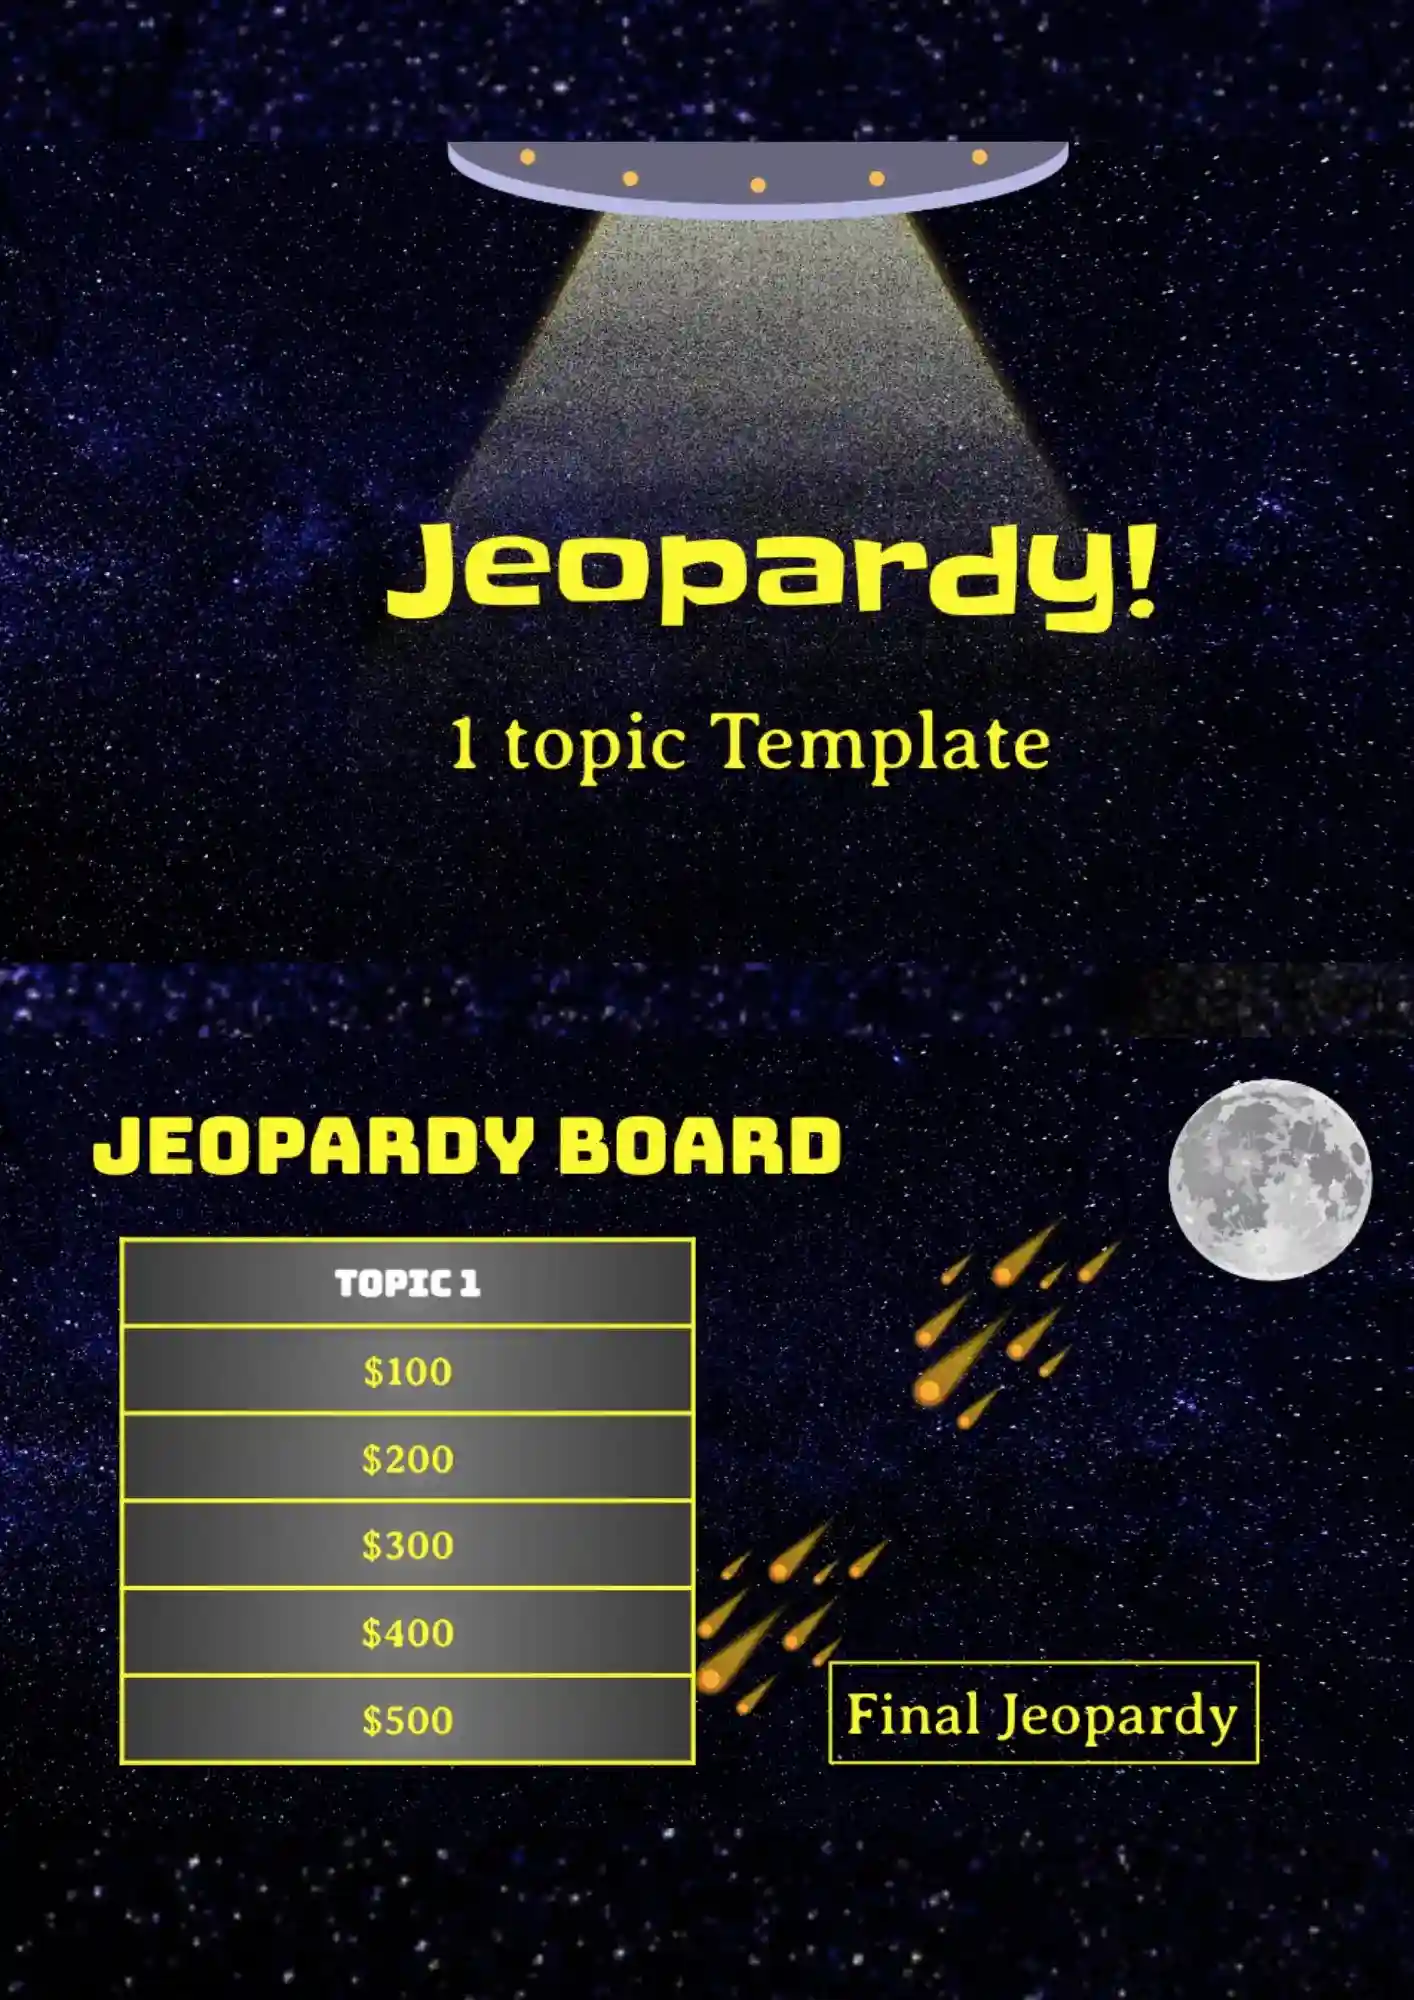 Jeopardy 1-topic Template